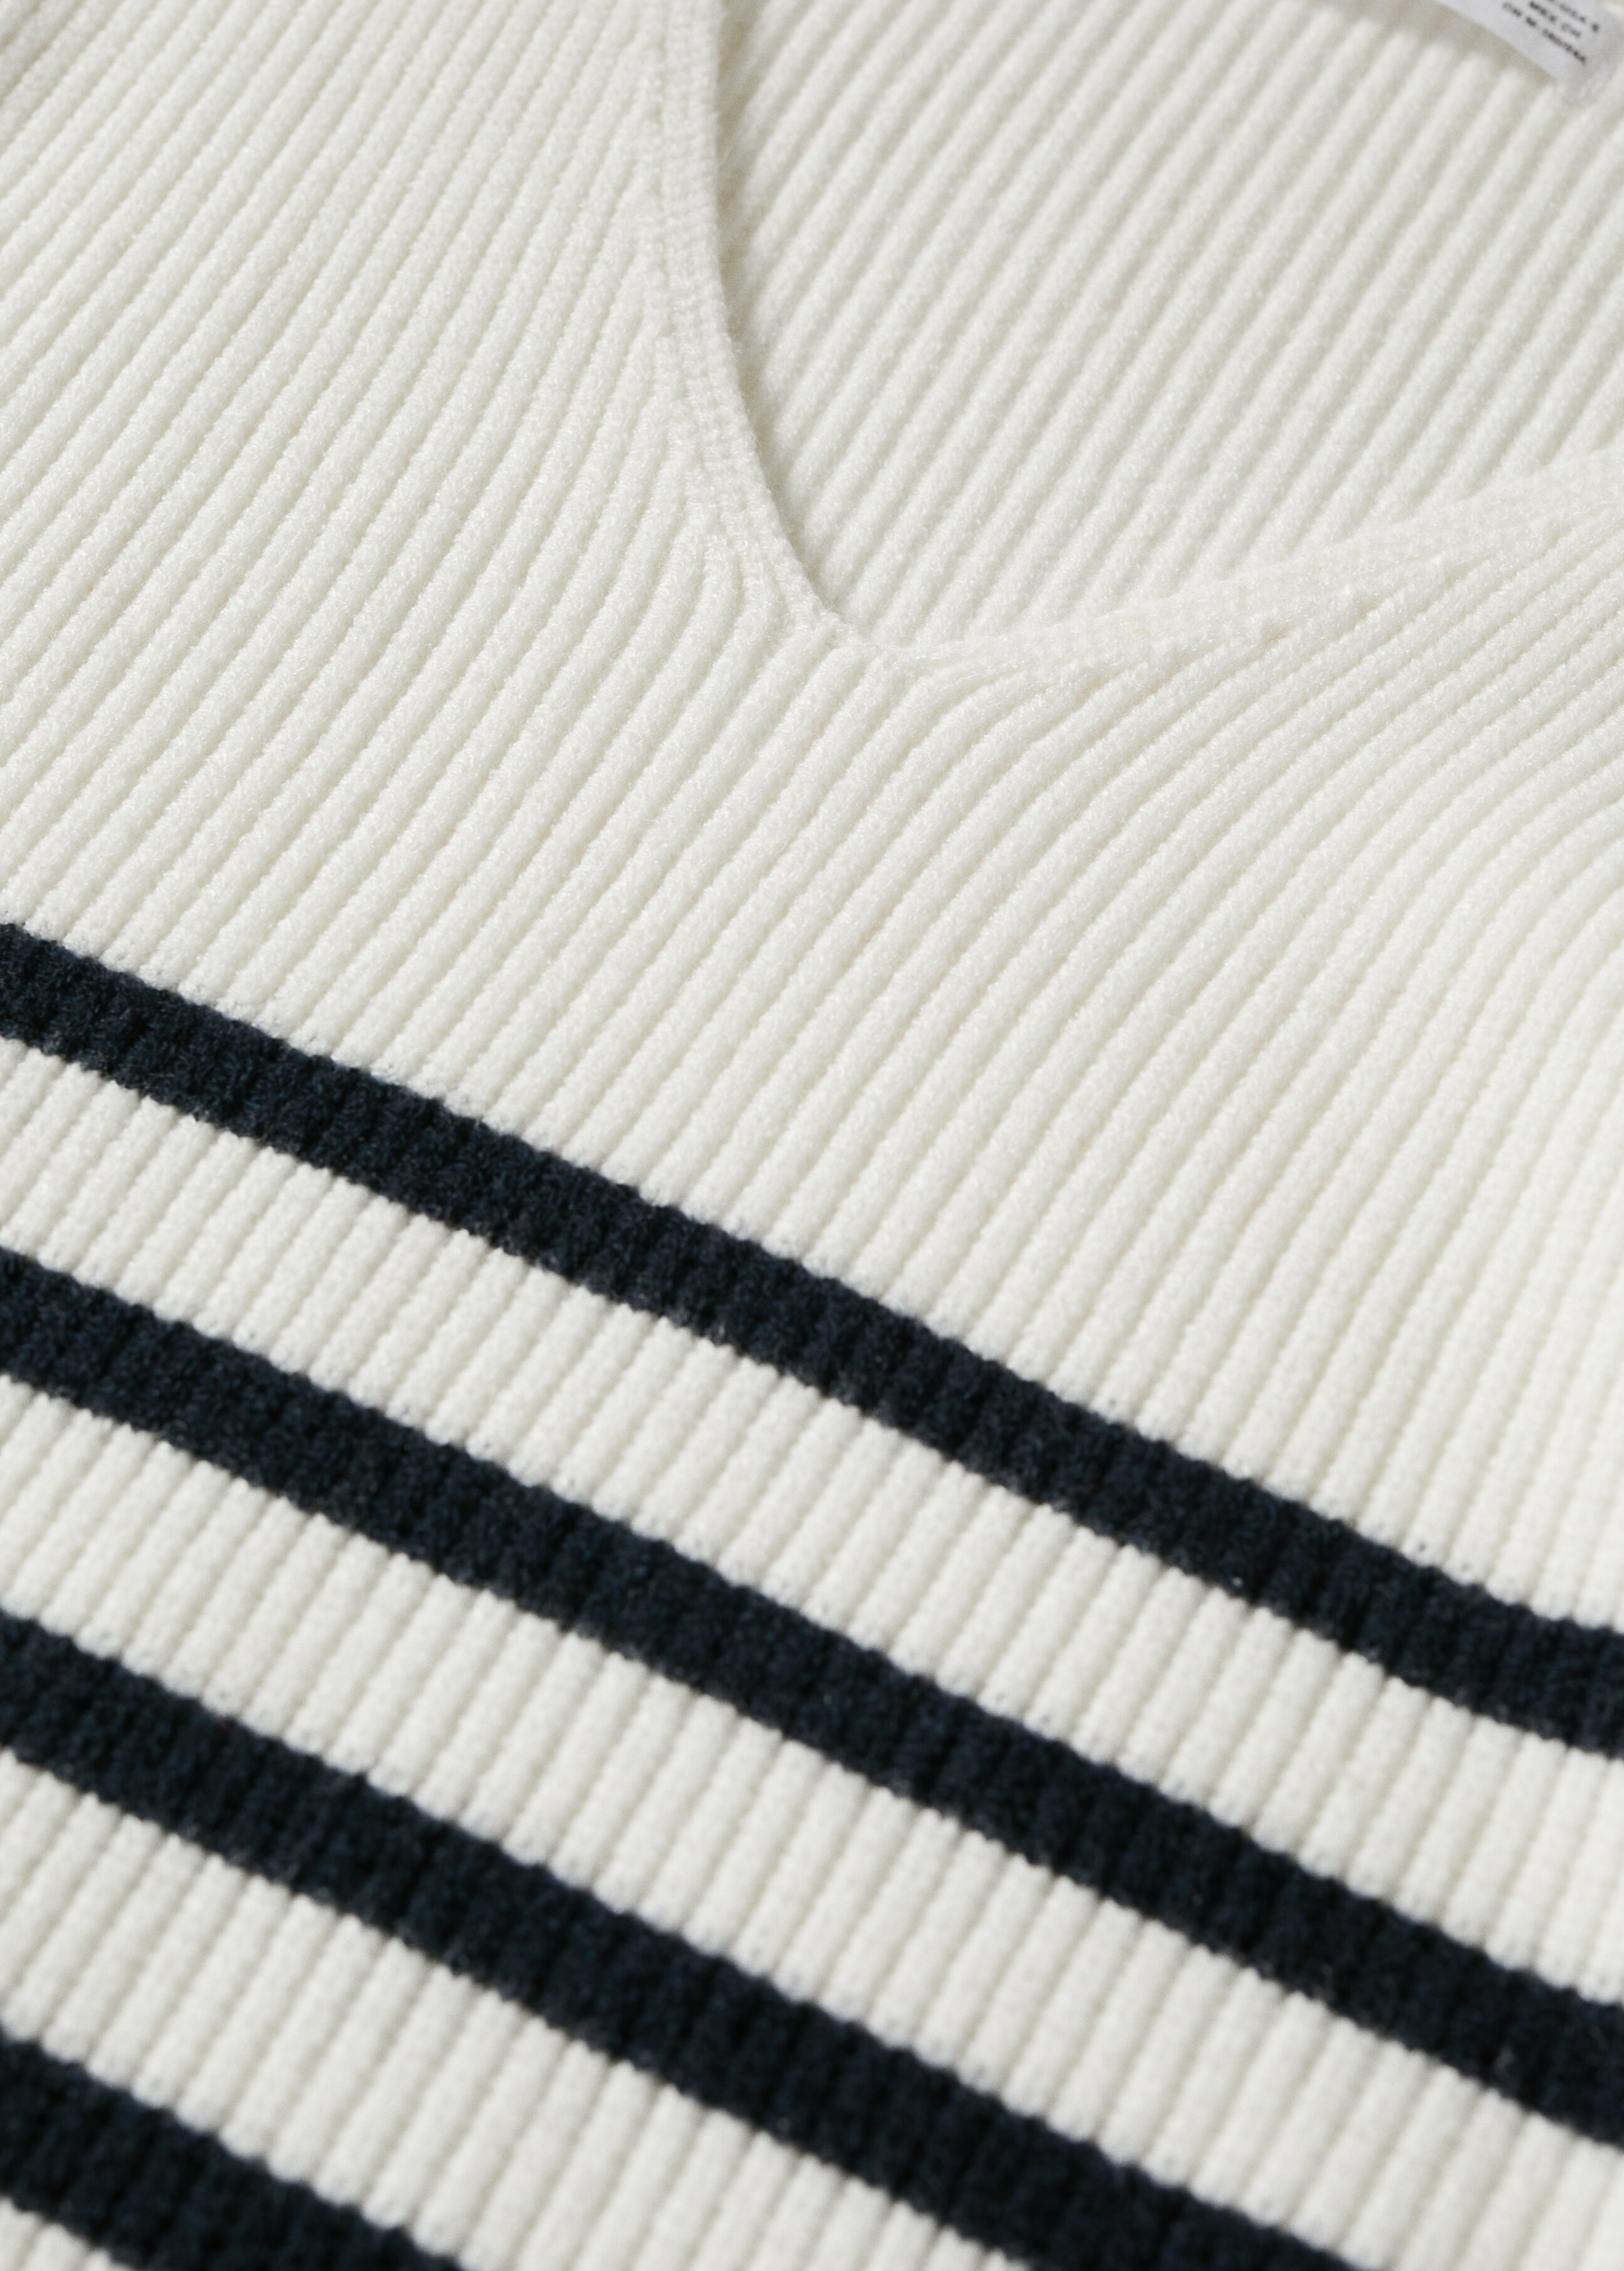 Oversized striped sweater - Details of the article 8